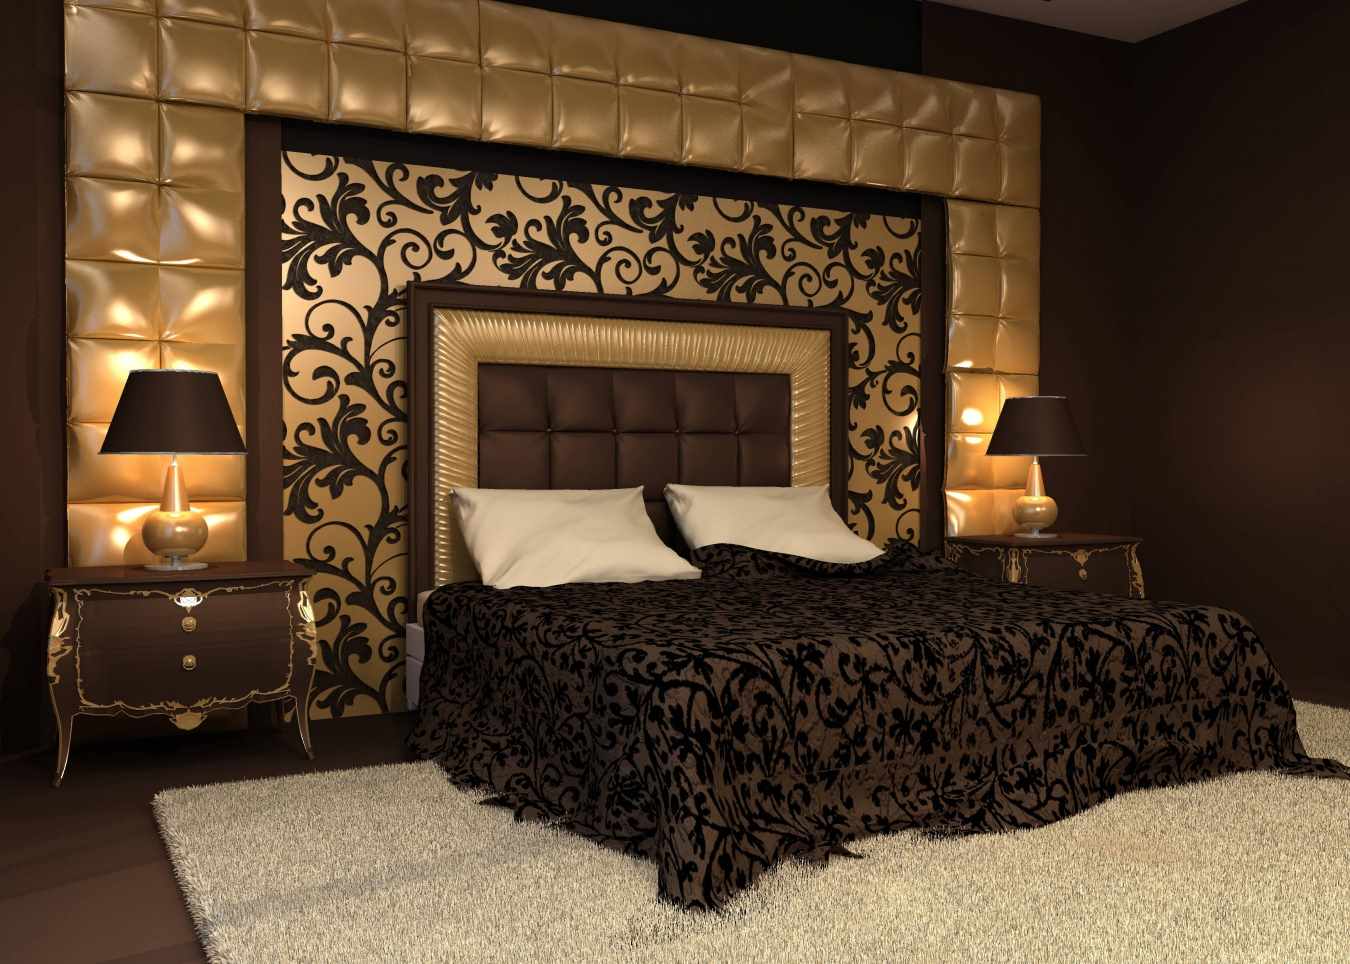 An example of a light decoration of the wall design in the bedroom